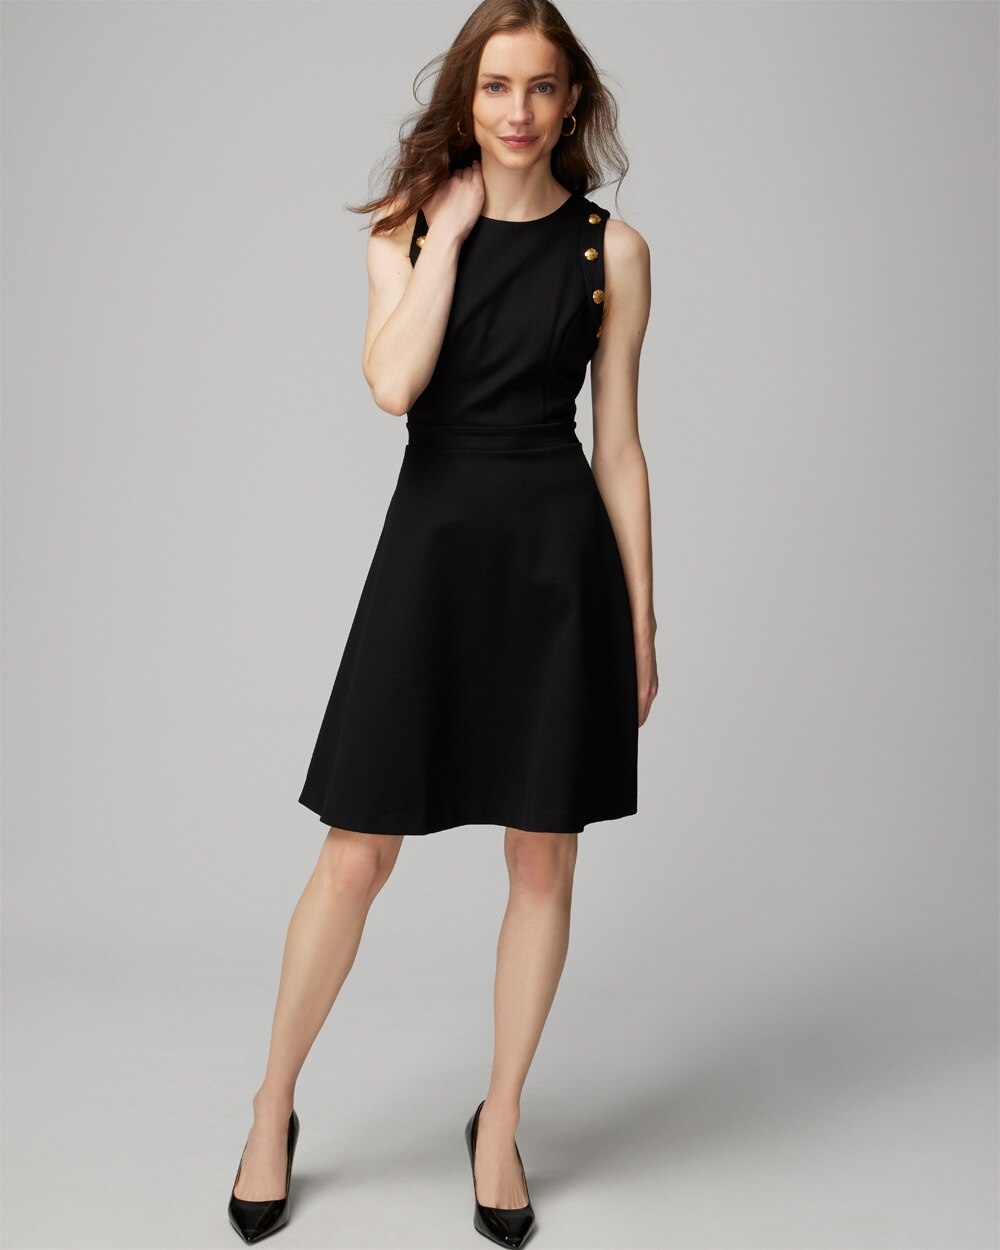 Luxe Stretch Button Detail Fit & Flare Dress video preview image, click to start video